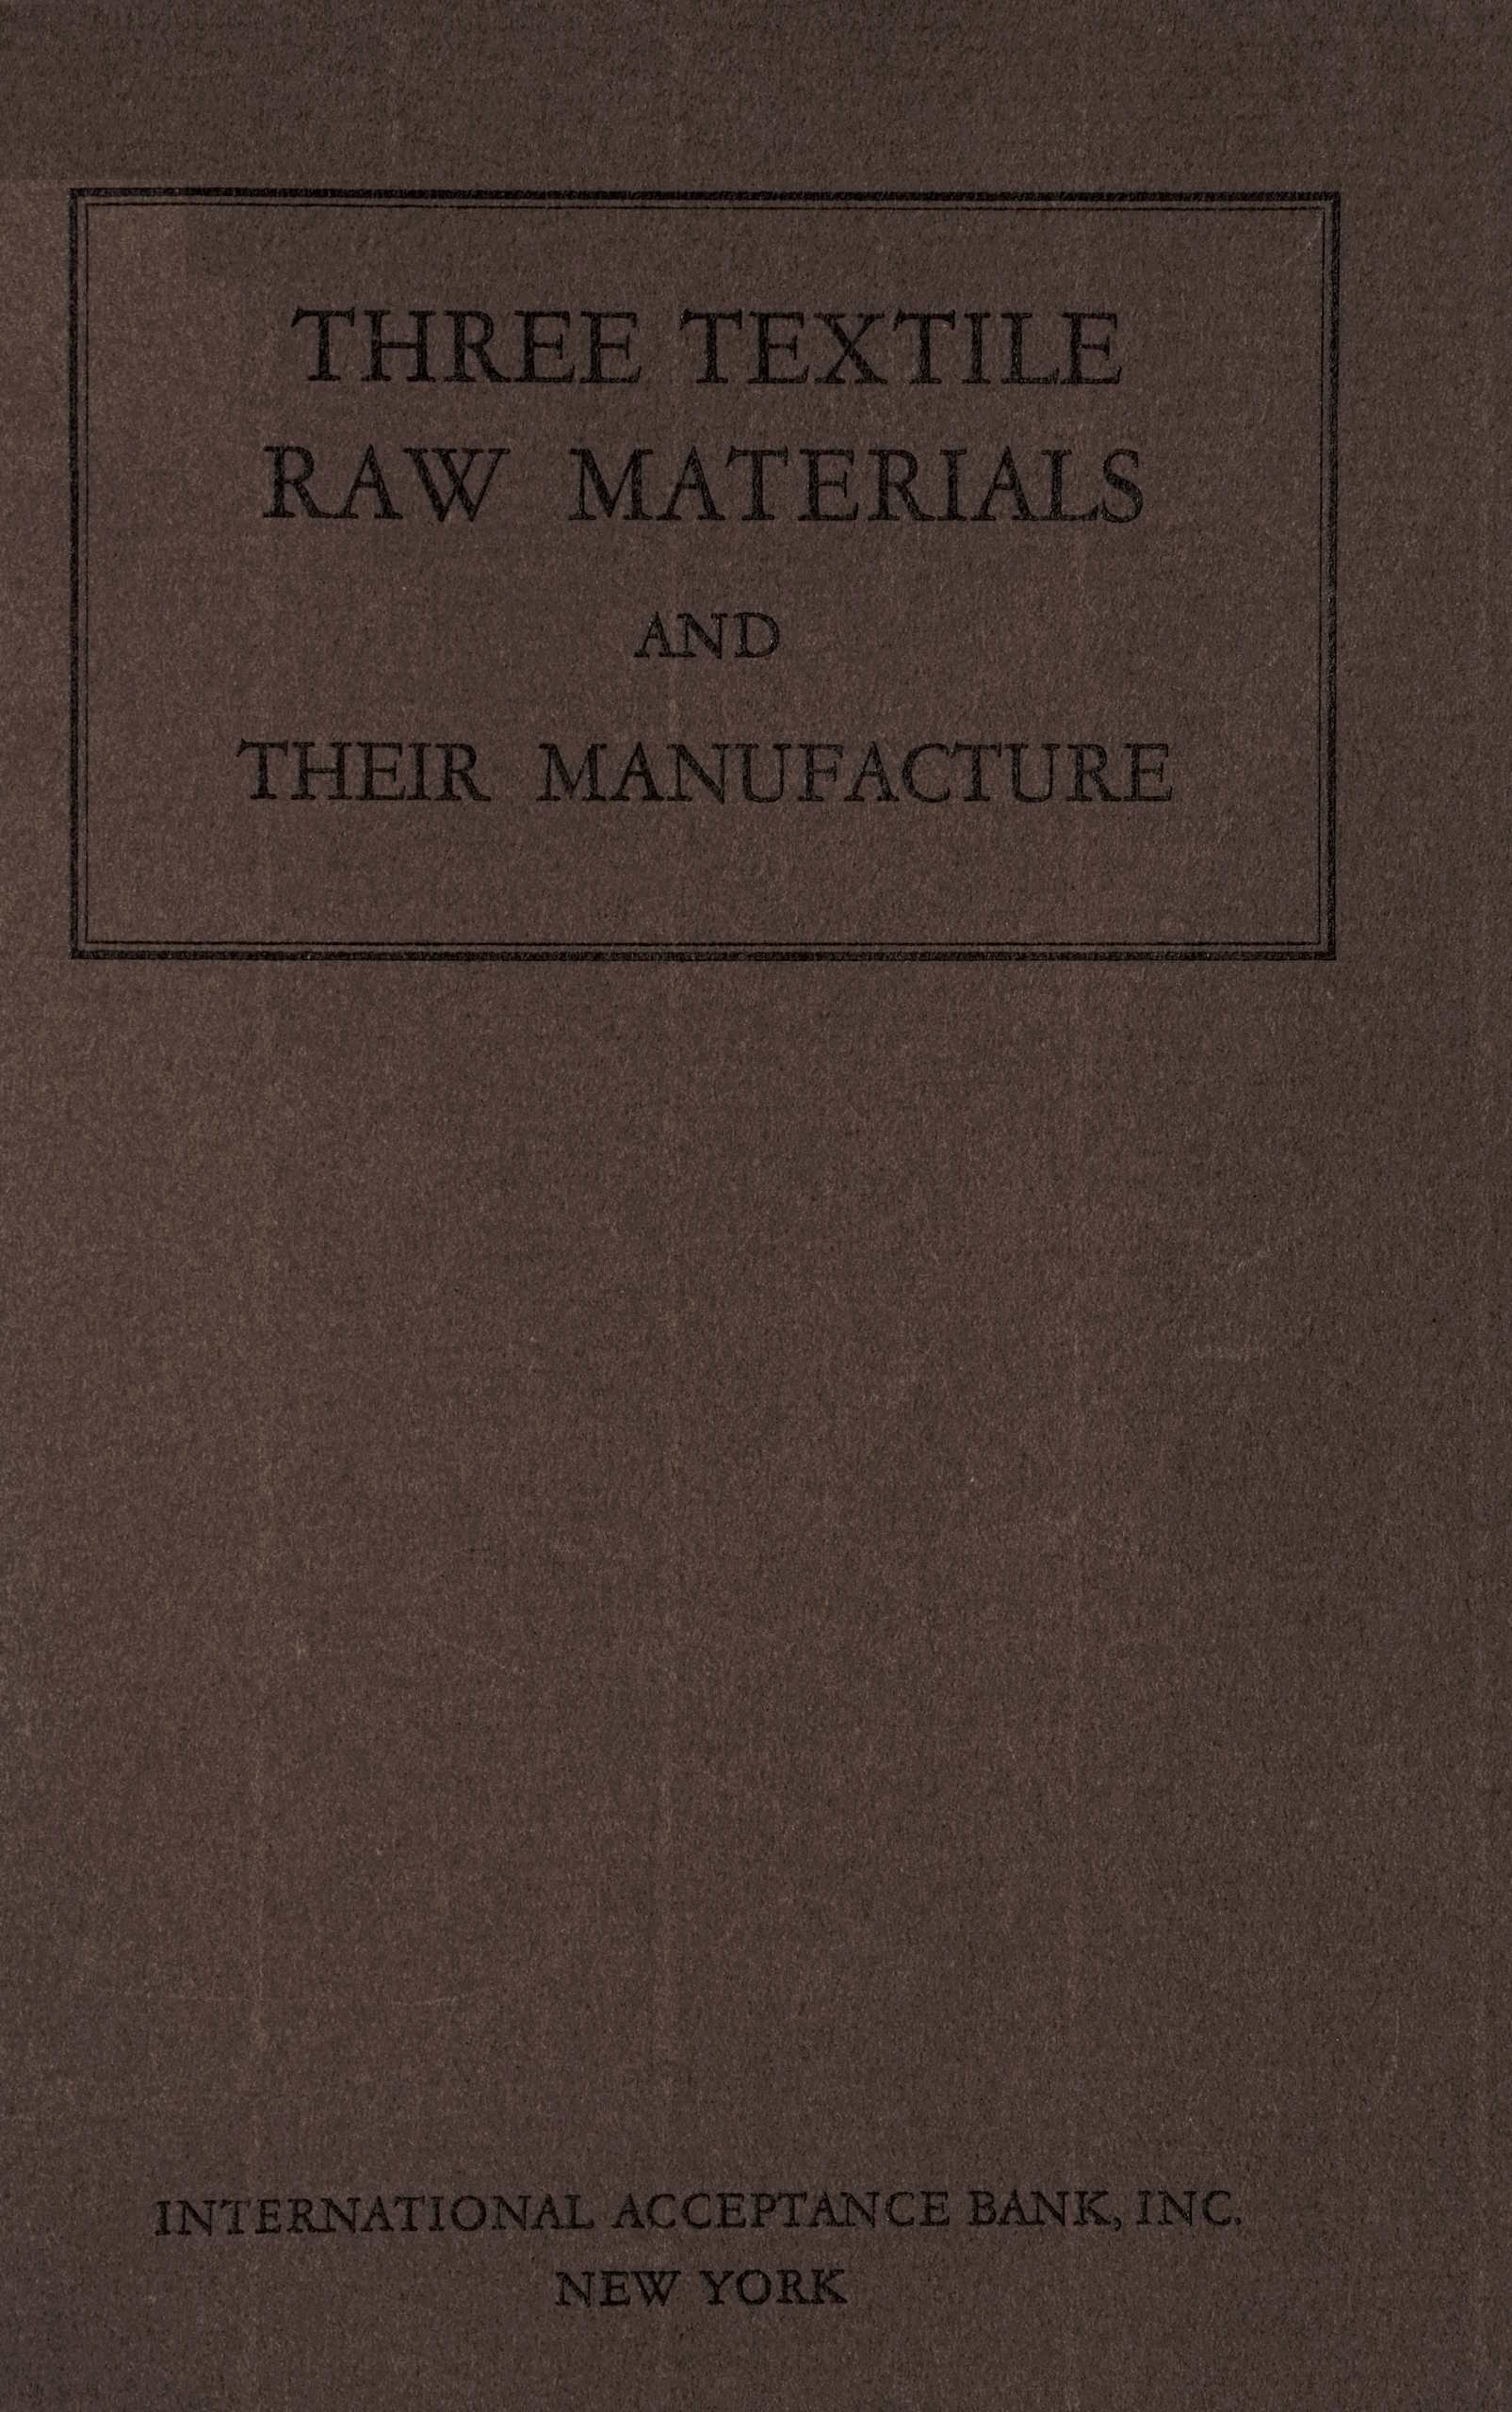 Three textile raw materials and their manufacture